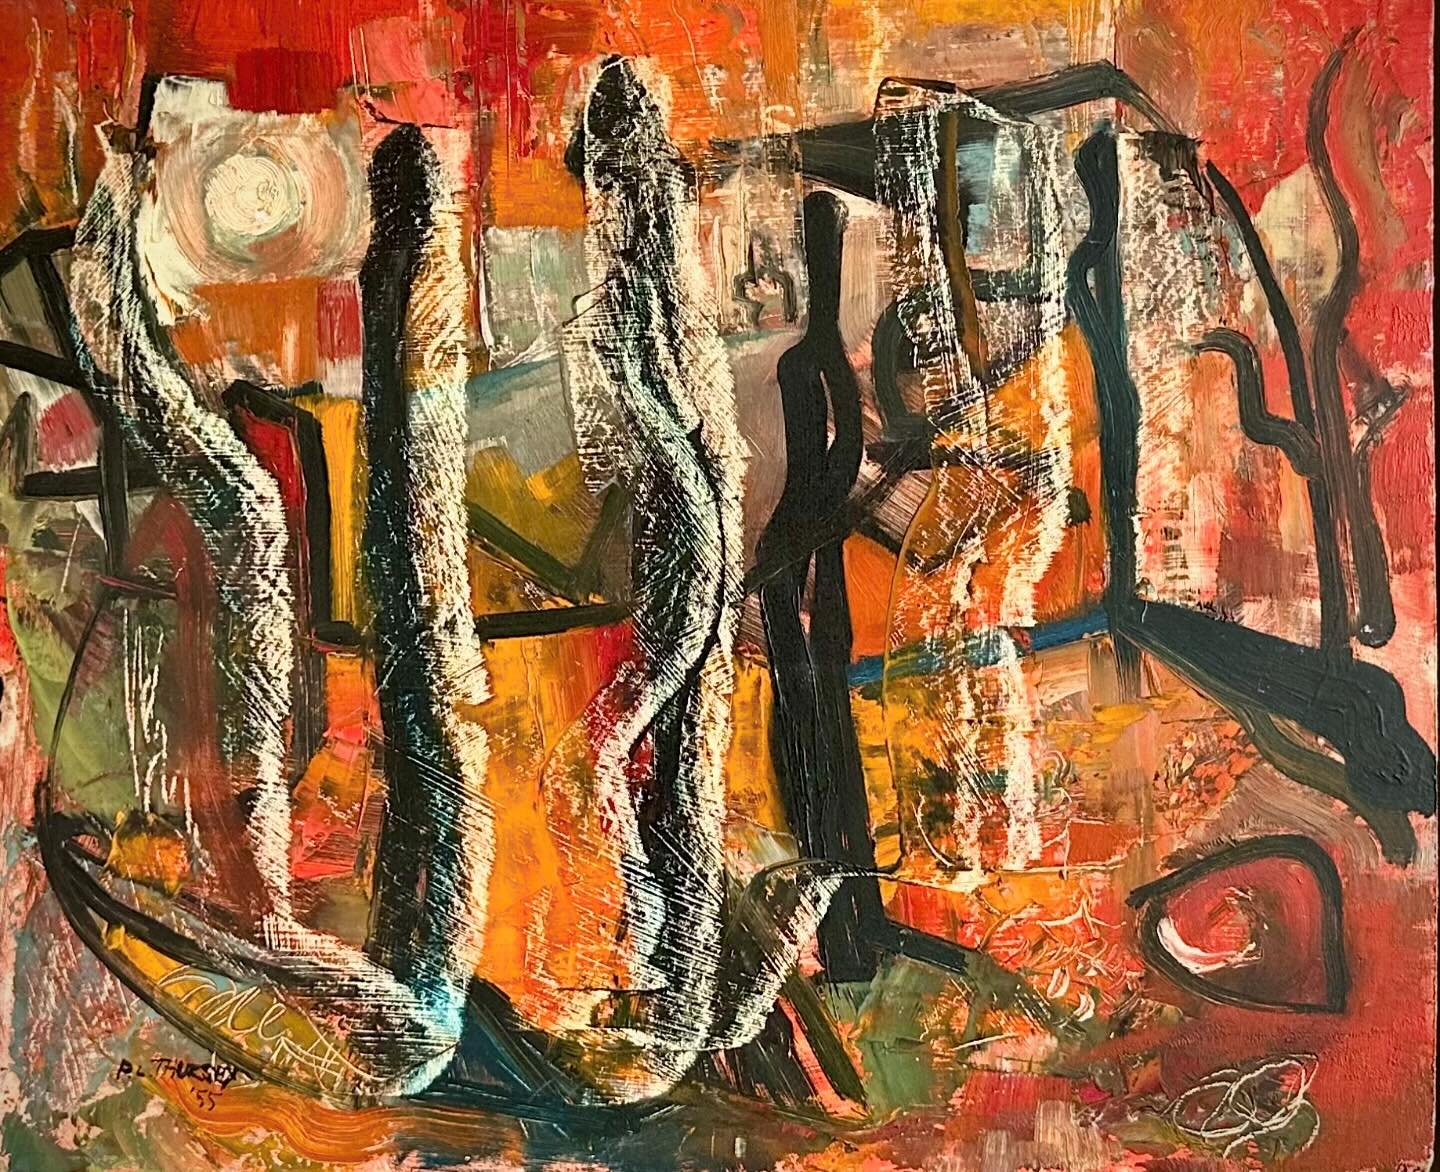 Peter Thursby
1930 - 2011
Sculptor &amp; Painter

This painting is an early Thursby from our private collection and is dated 1955. Titled: Standing Figures - verso &lsquo;Homage to Henry Moore 1955&rsquo;

The following images are from a bronze water